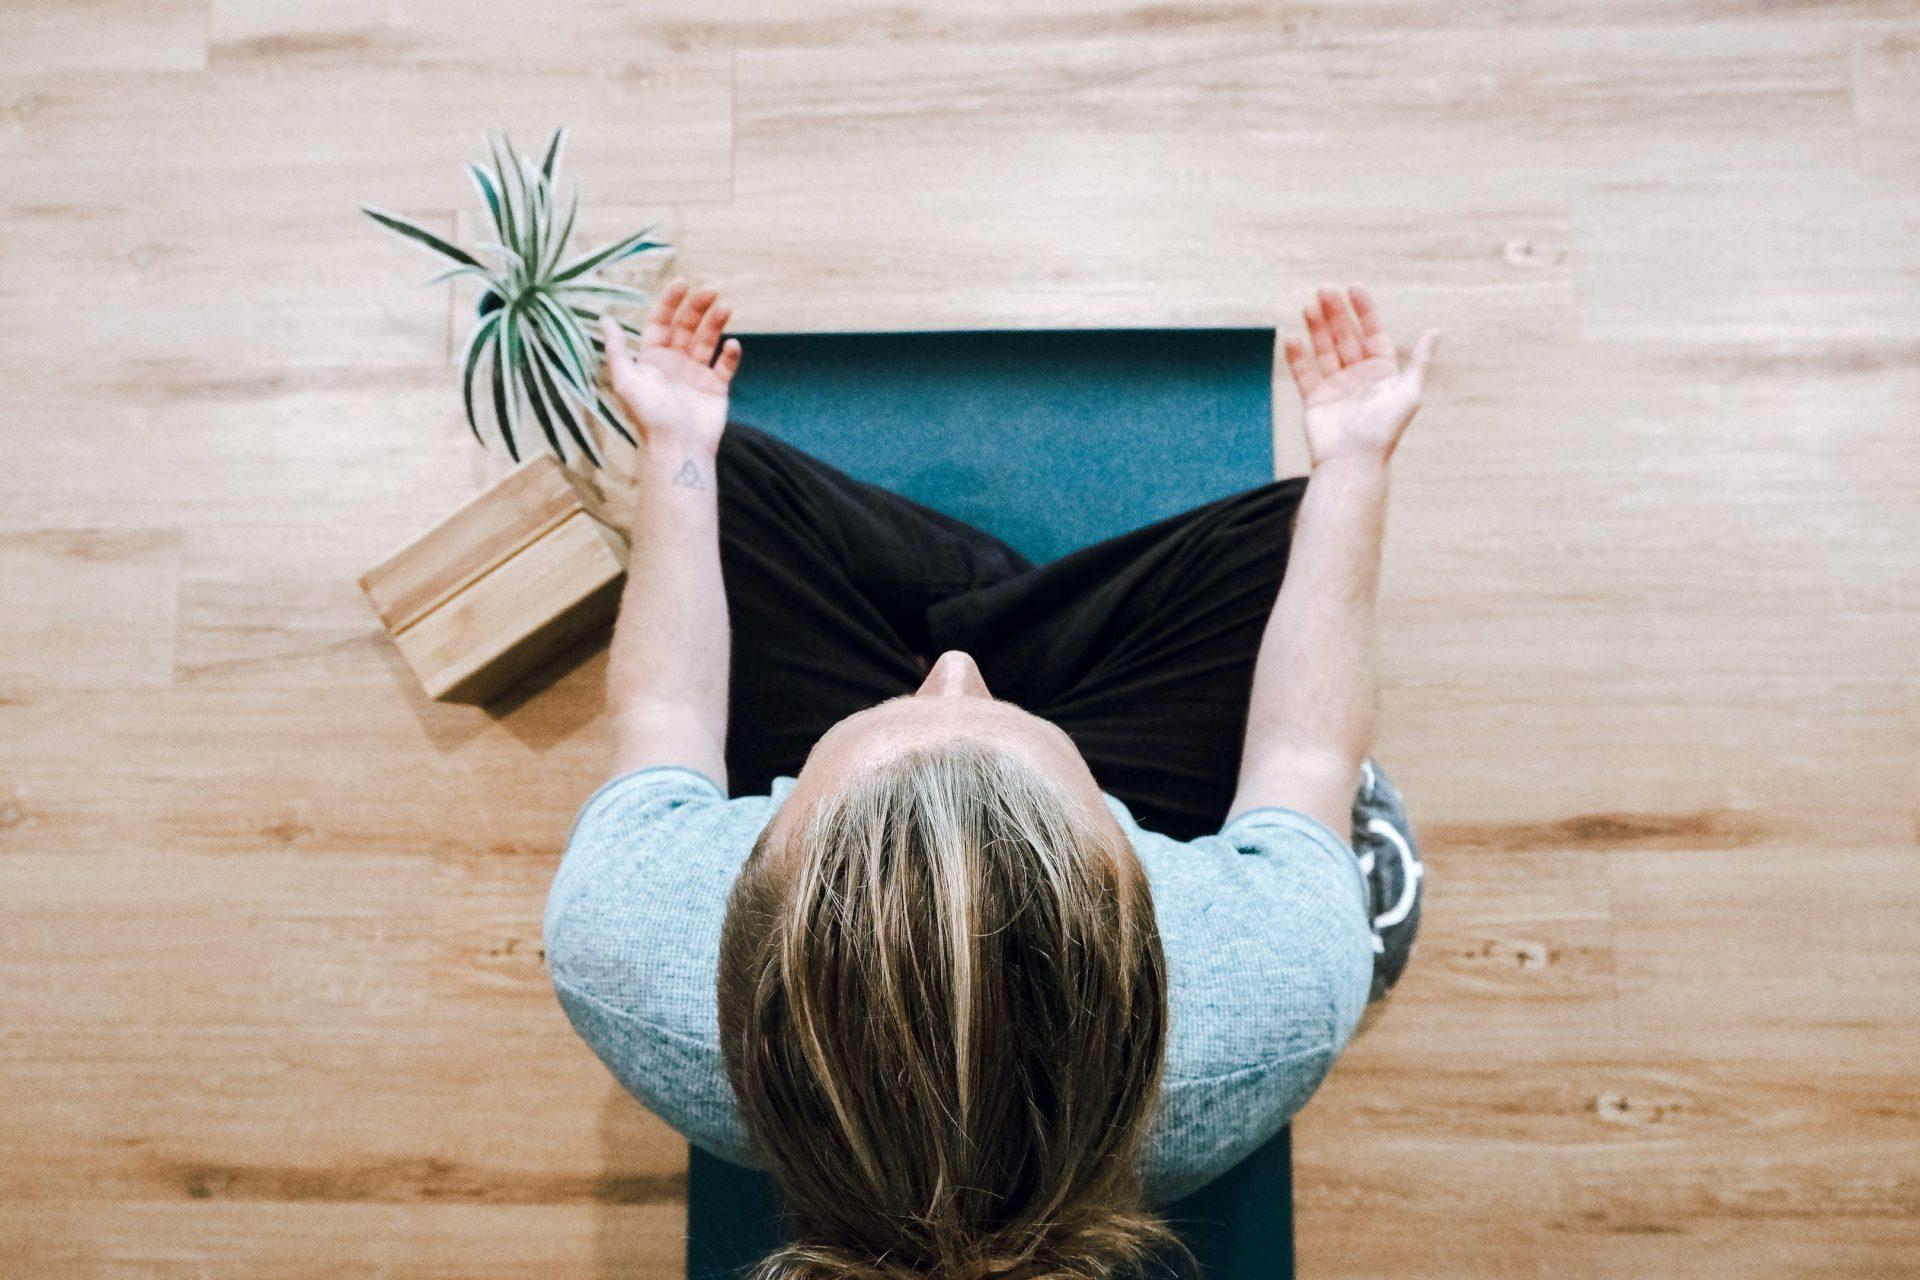 Mindfulness Meditation Exercise to do at the Workplace